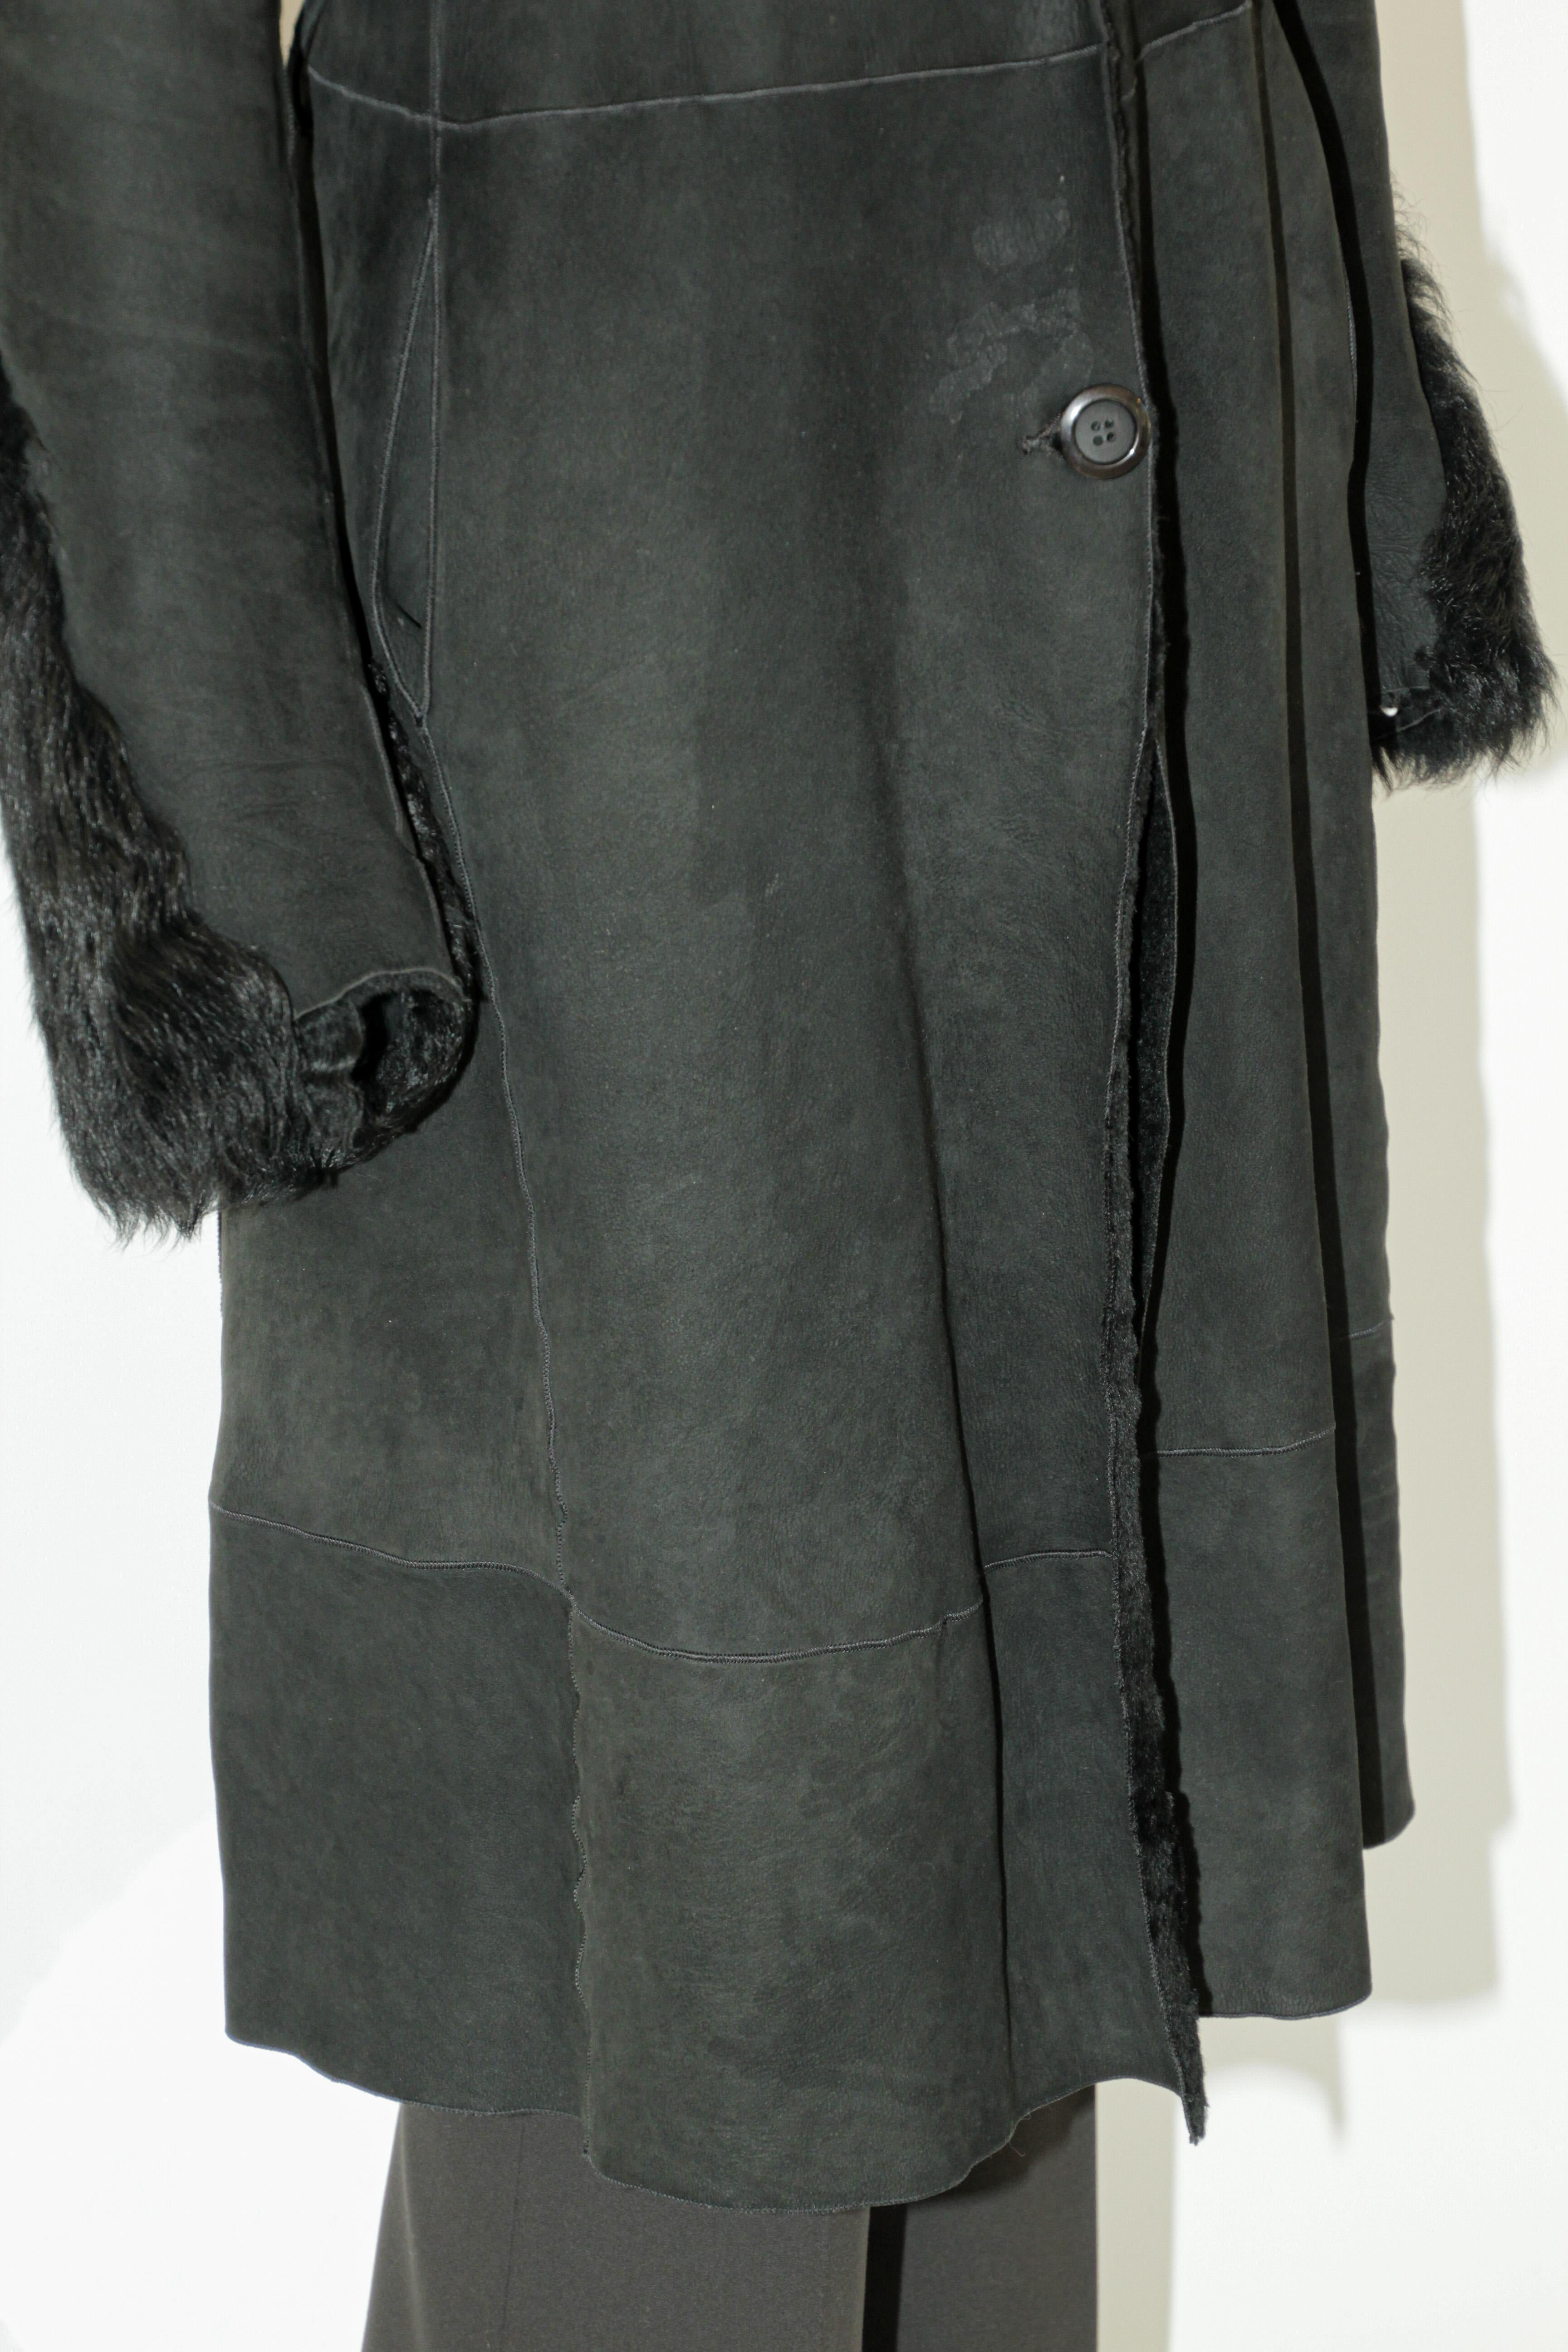 Black Shearling Lamb Suede Leather Fur Jacket Coat In Good Condition For Sale In North Hollywood, CA